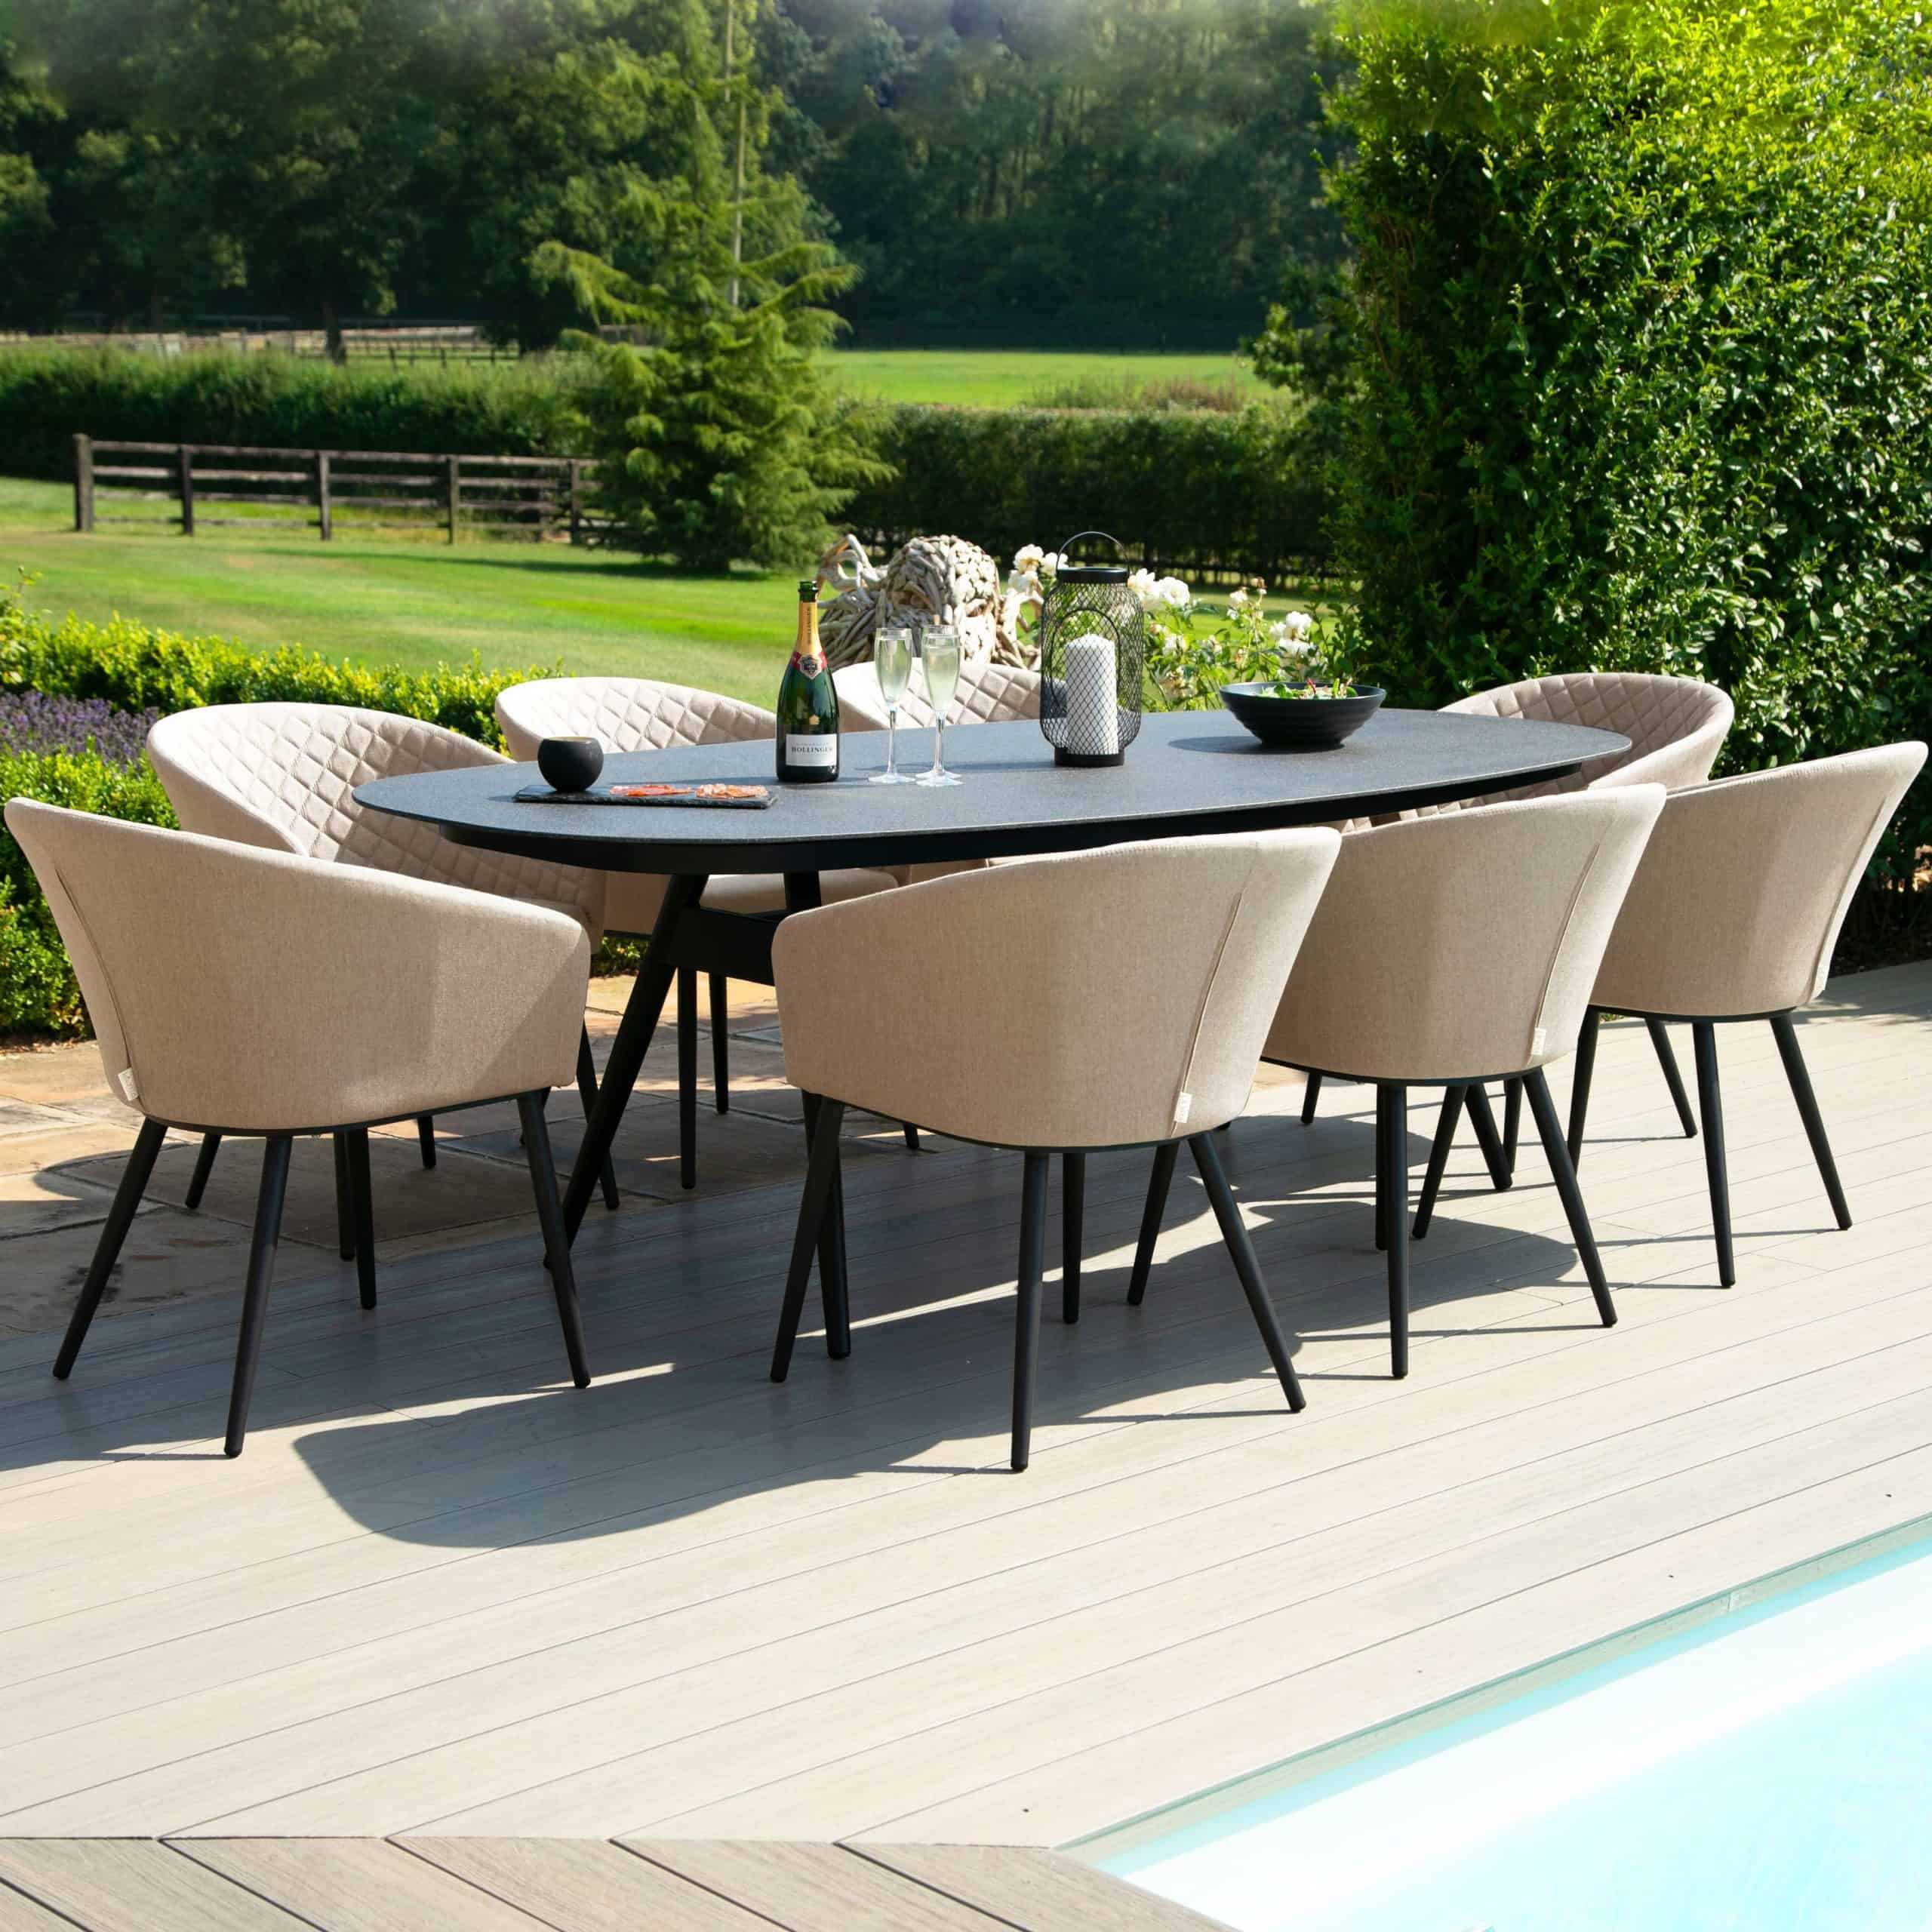 8-Seater Outdoor Dining Table and Chairs-pic_1